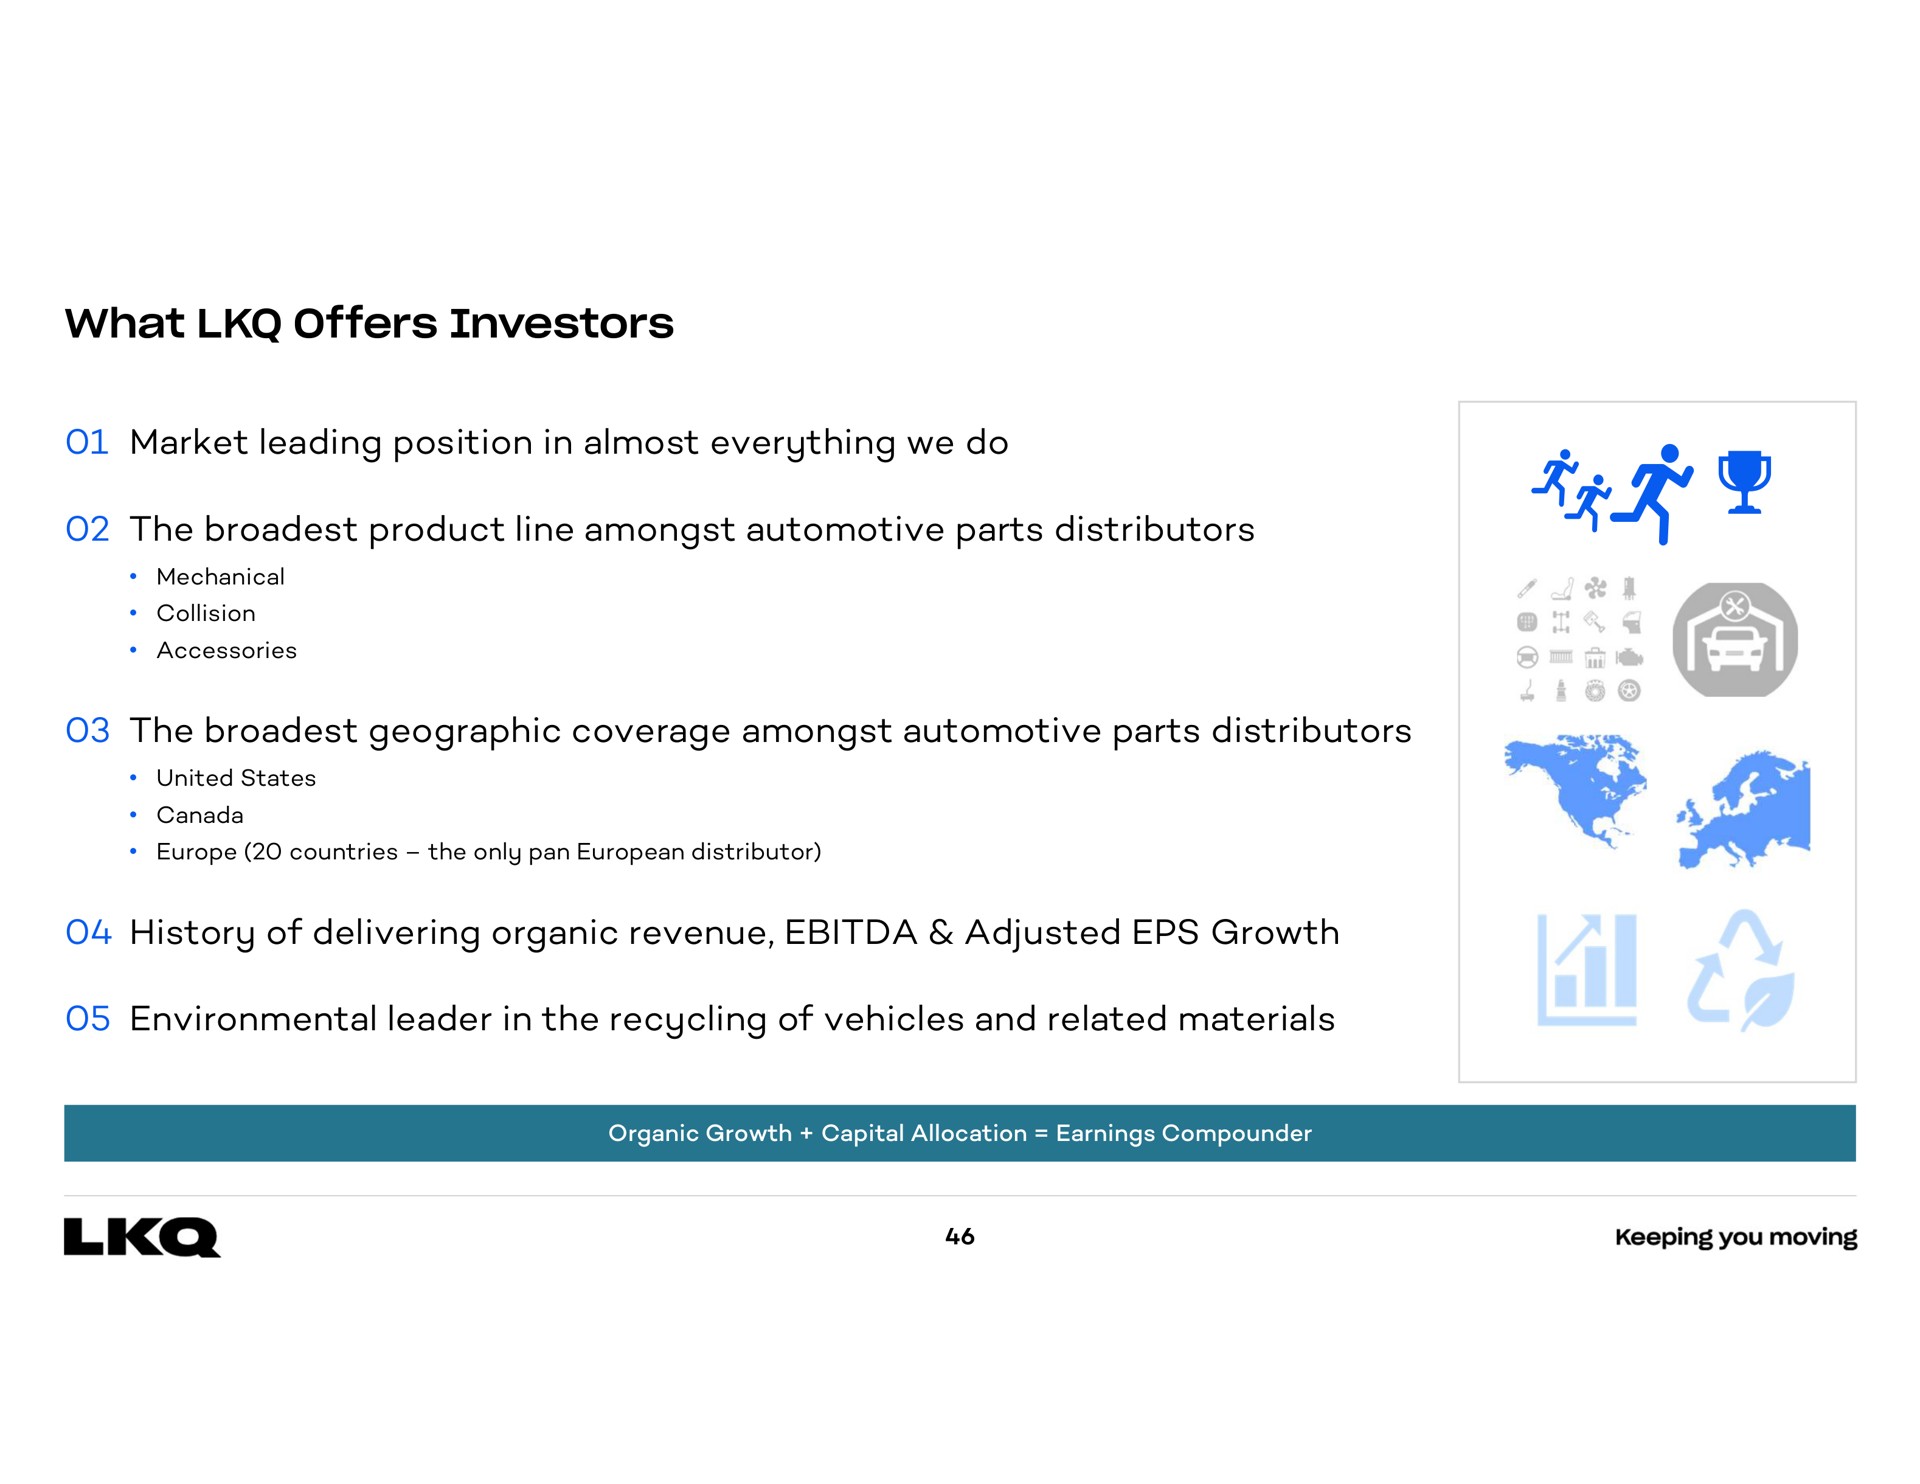 what offers investors market leading position in almost everything we do the product line amongst automotive parts distributors the geographic coverage amongst automotive parts distributors history of delivering organic revenue adjusted growth environmental leader in the recycling of vehicles and related materials | LKQ